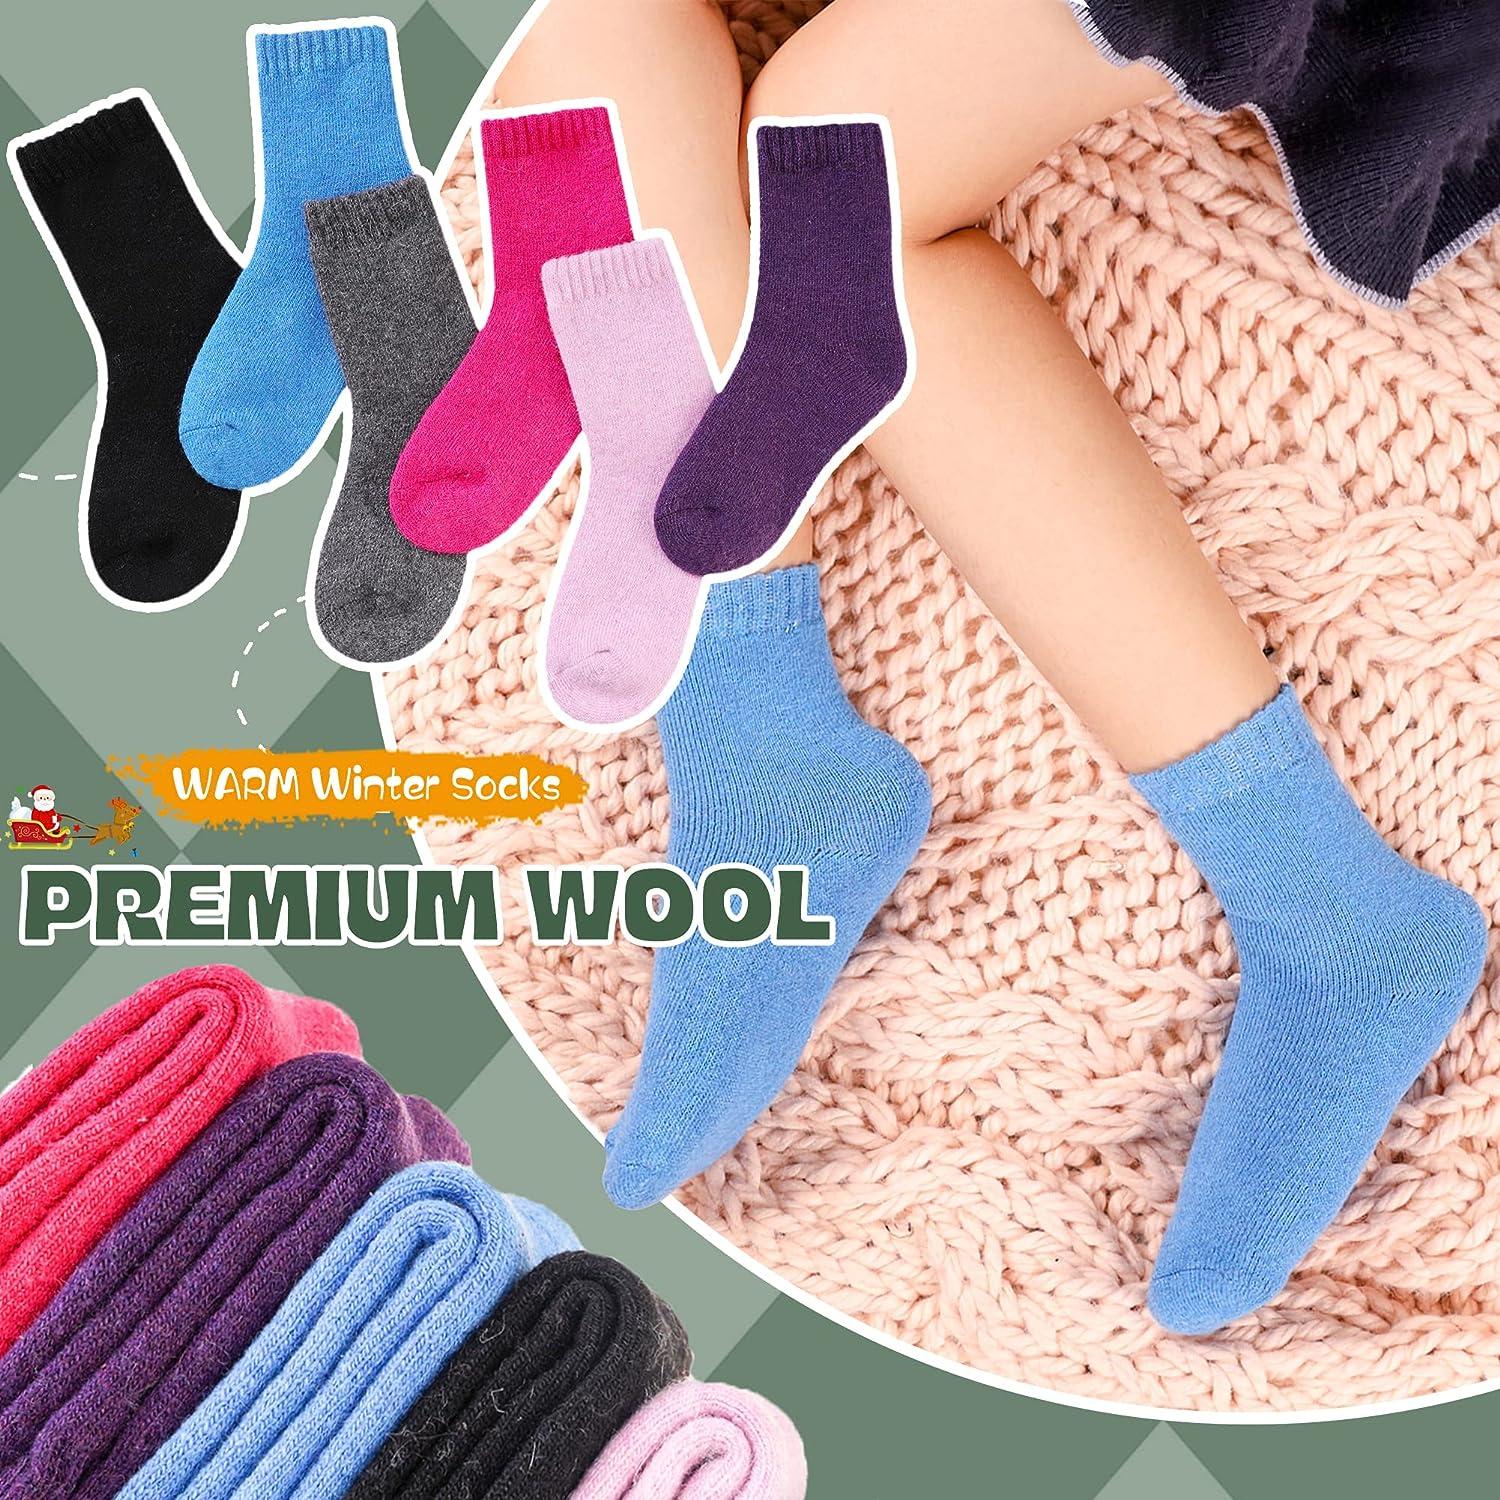 3 Pairs New Fashion Women Casual Winter Warm Socks for Ladies Best Quality  Wool Socks Regular use and Breathable in Skin Pink Gray Colors